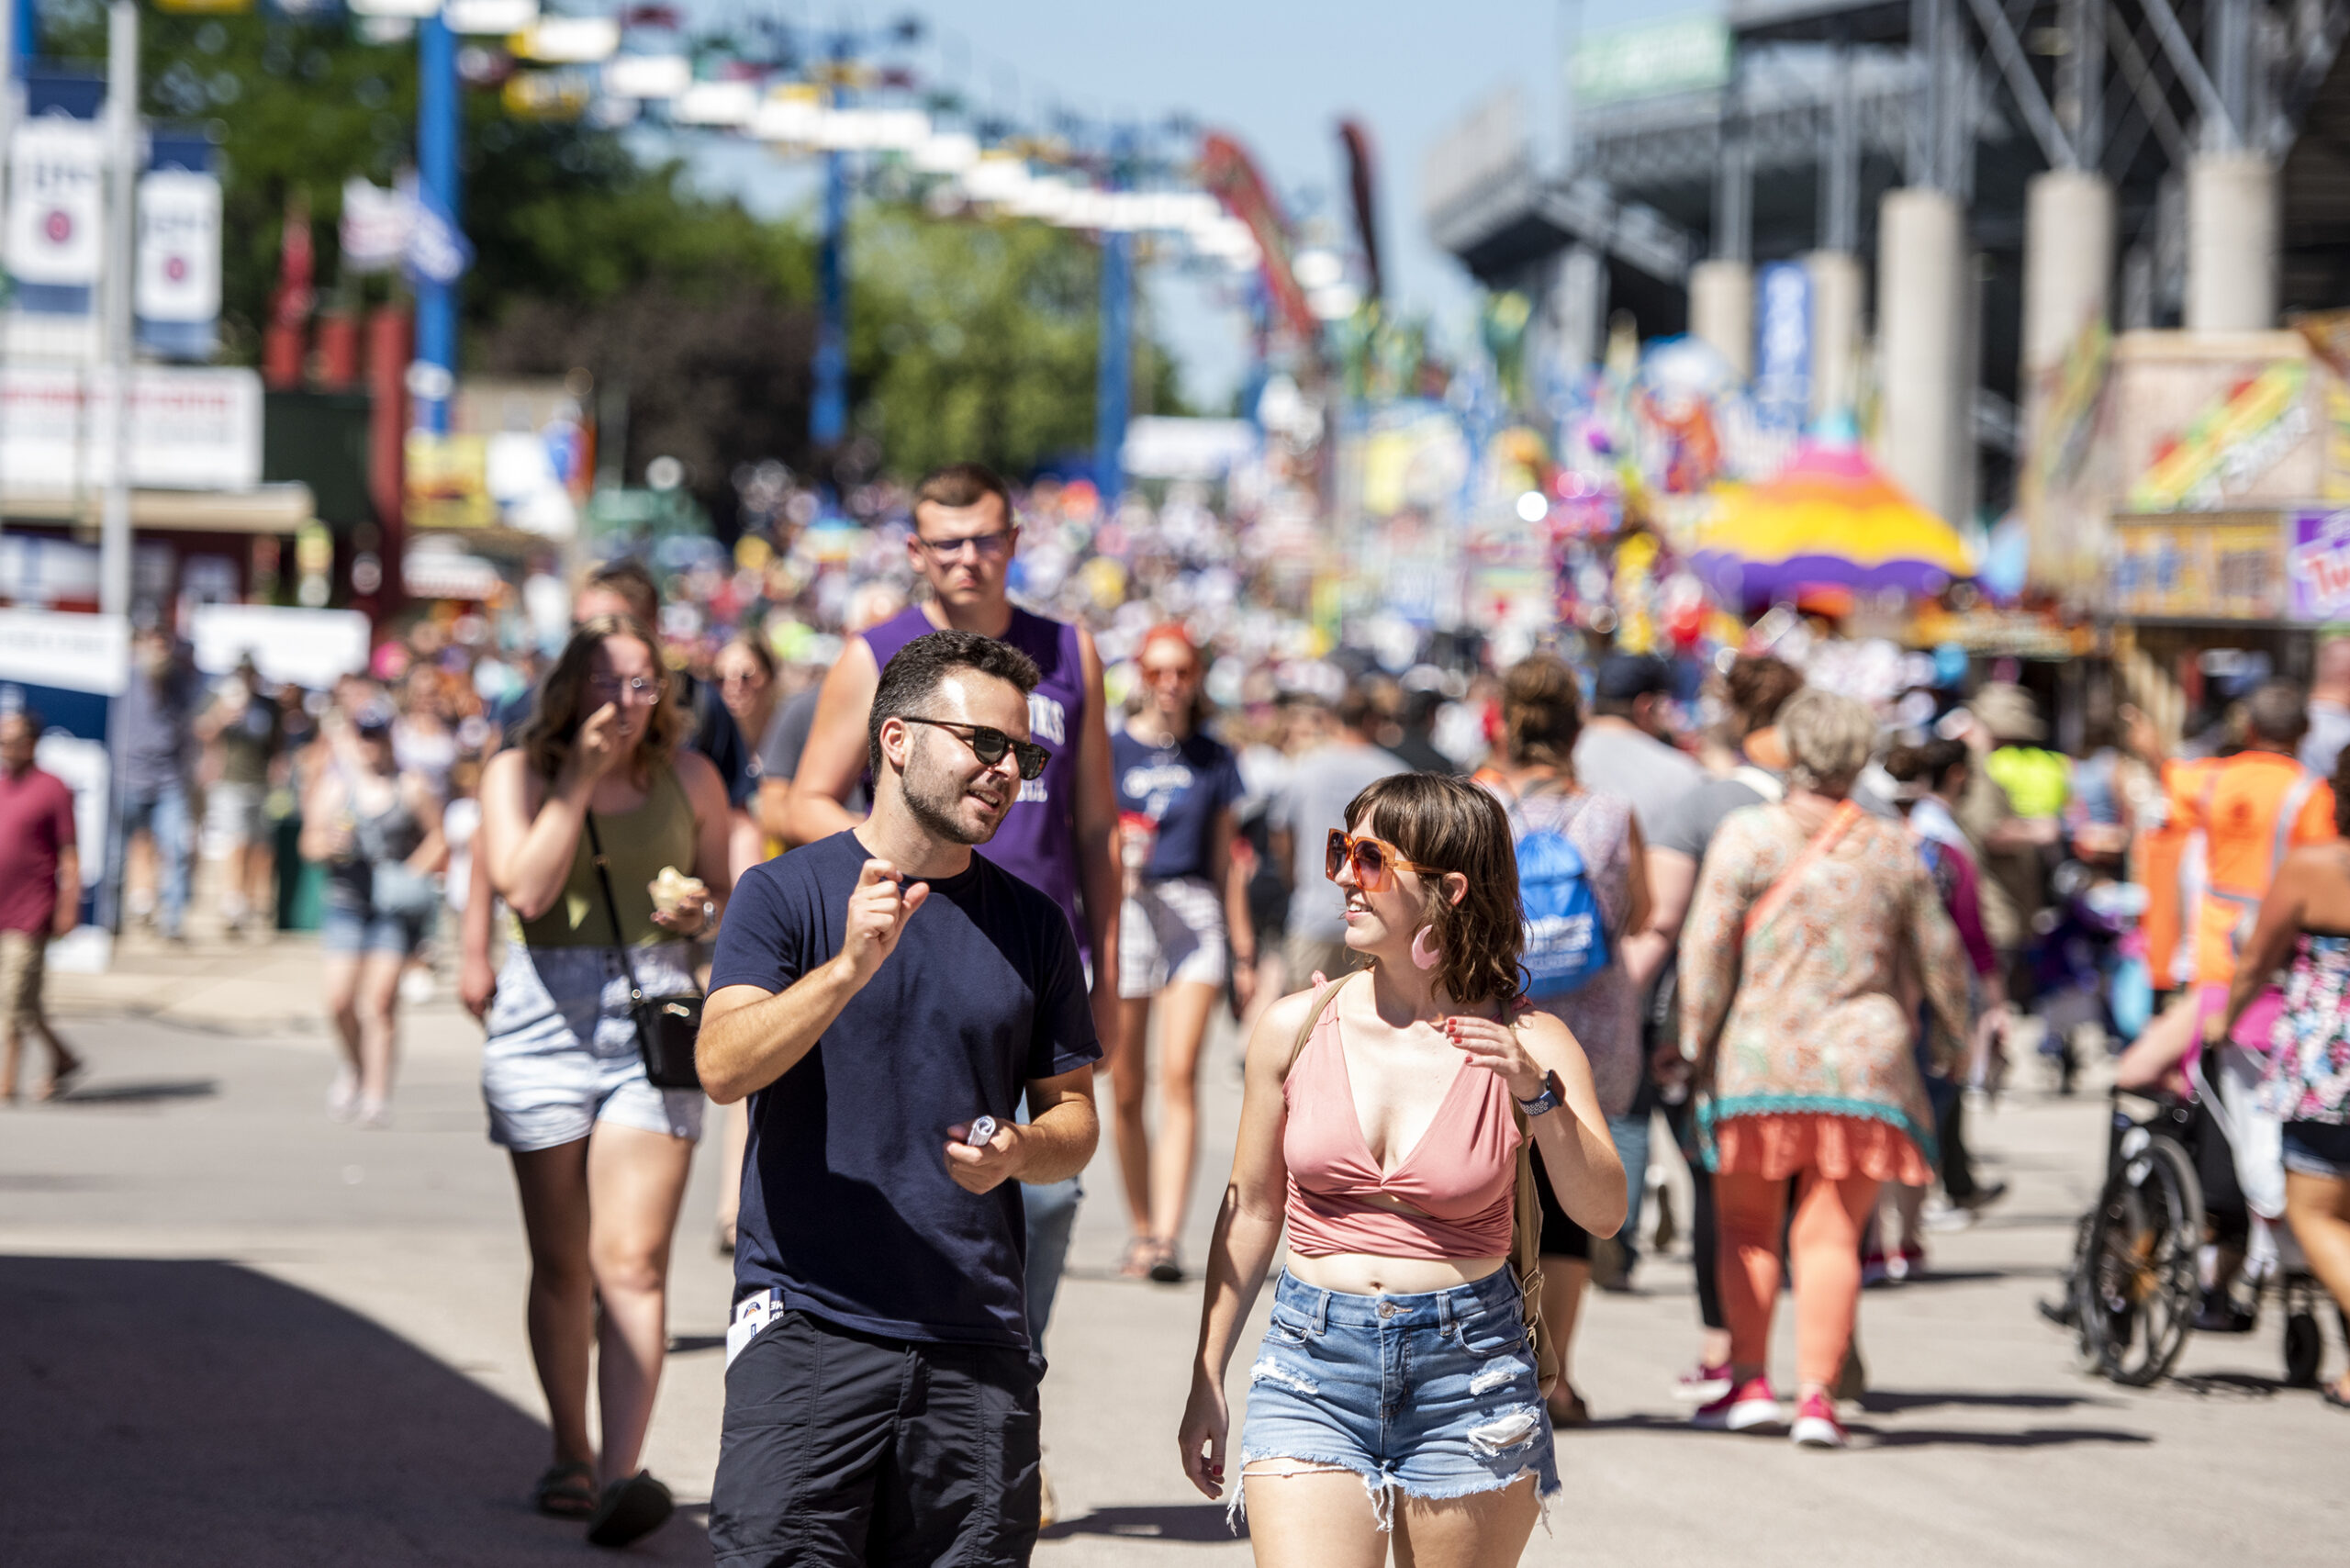 Fried foods galore, goat shows and more as Wisconsin State Fair kicks off its 171st year